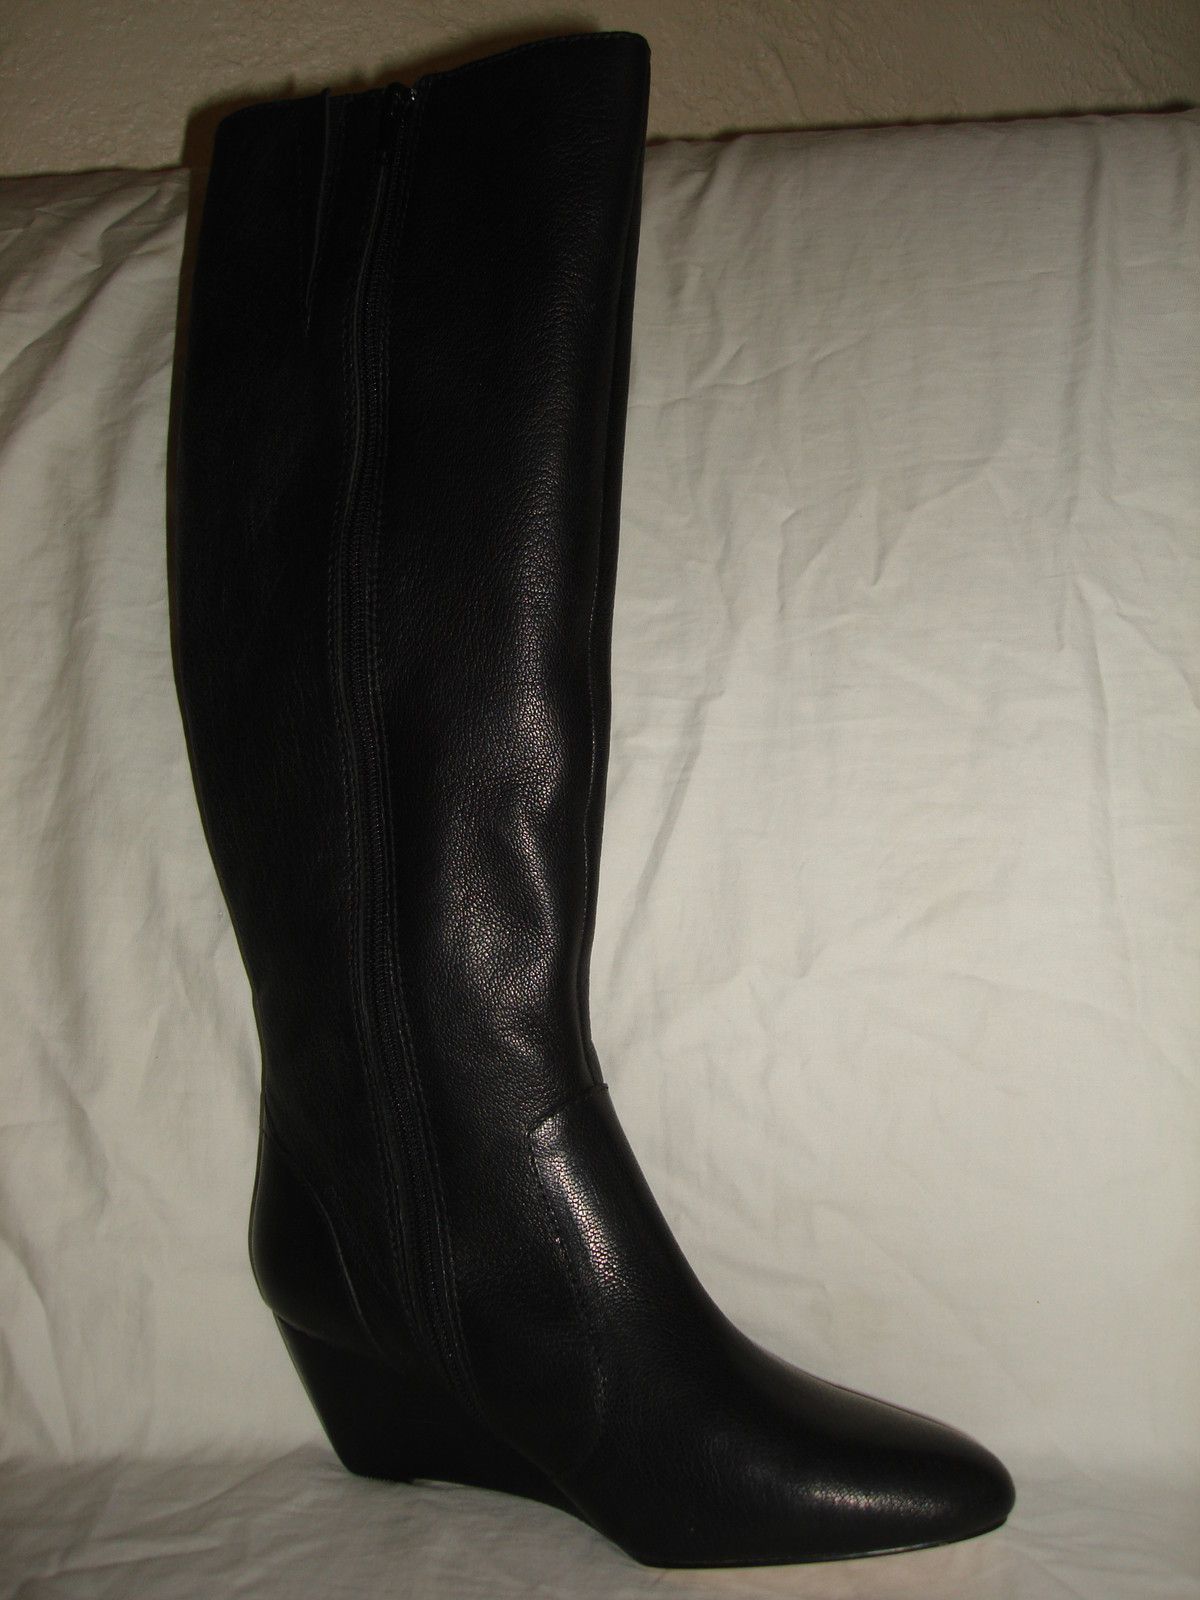 Cynthia Vincent Boots Langley Womens Shoes 6 5 Black Leather Knee